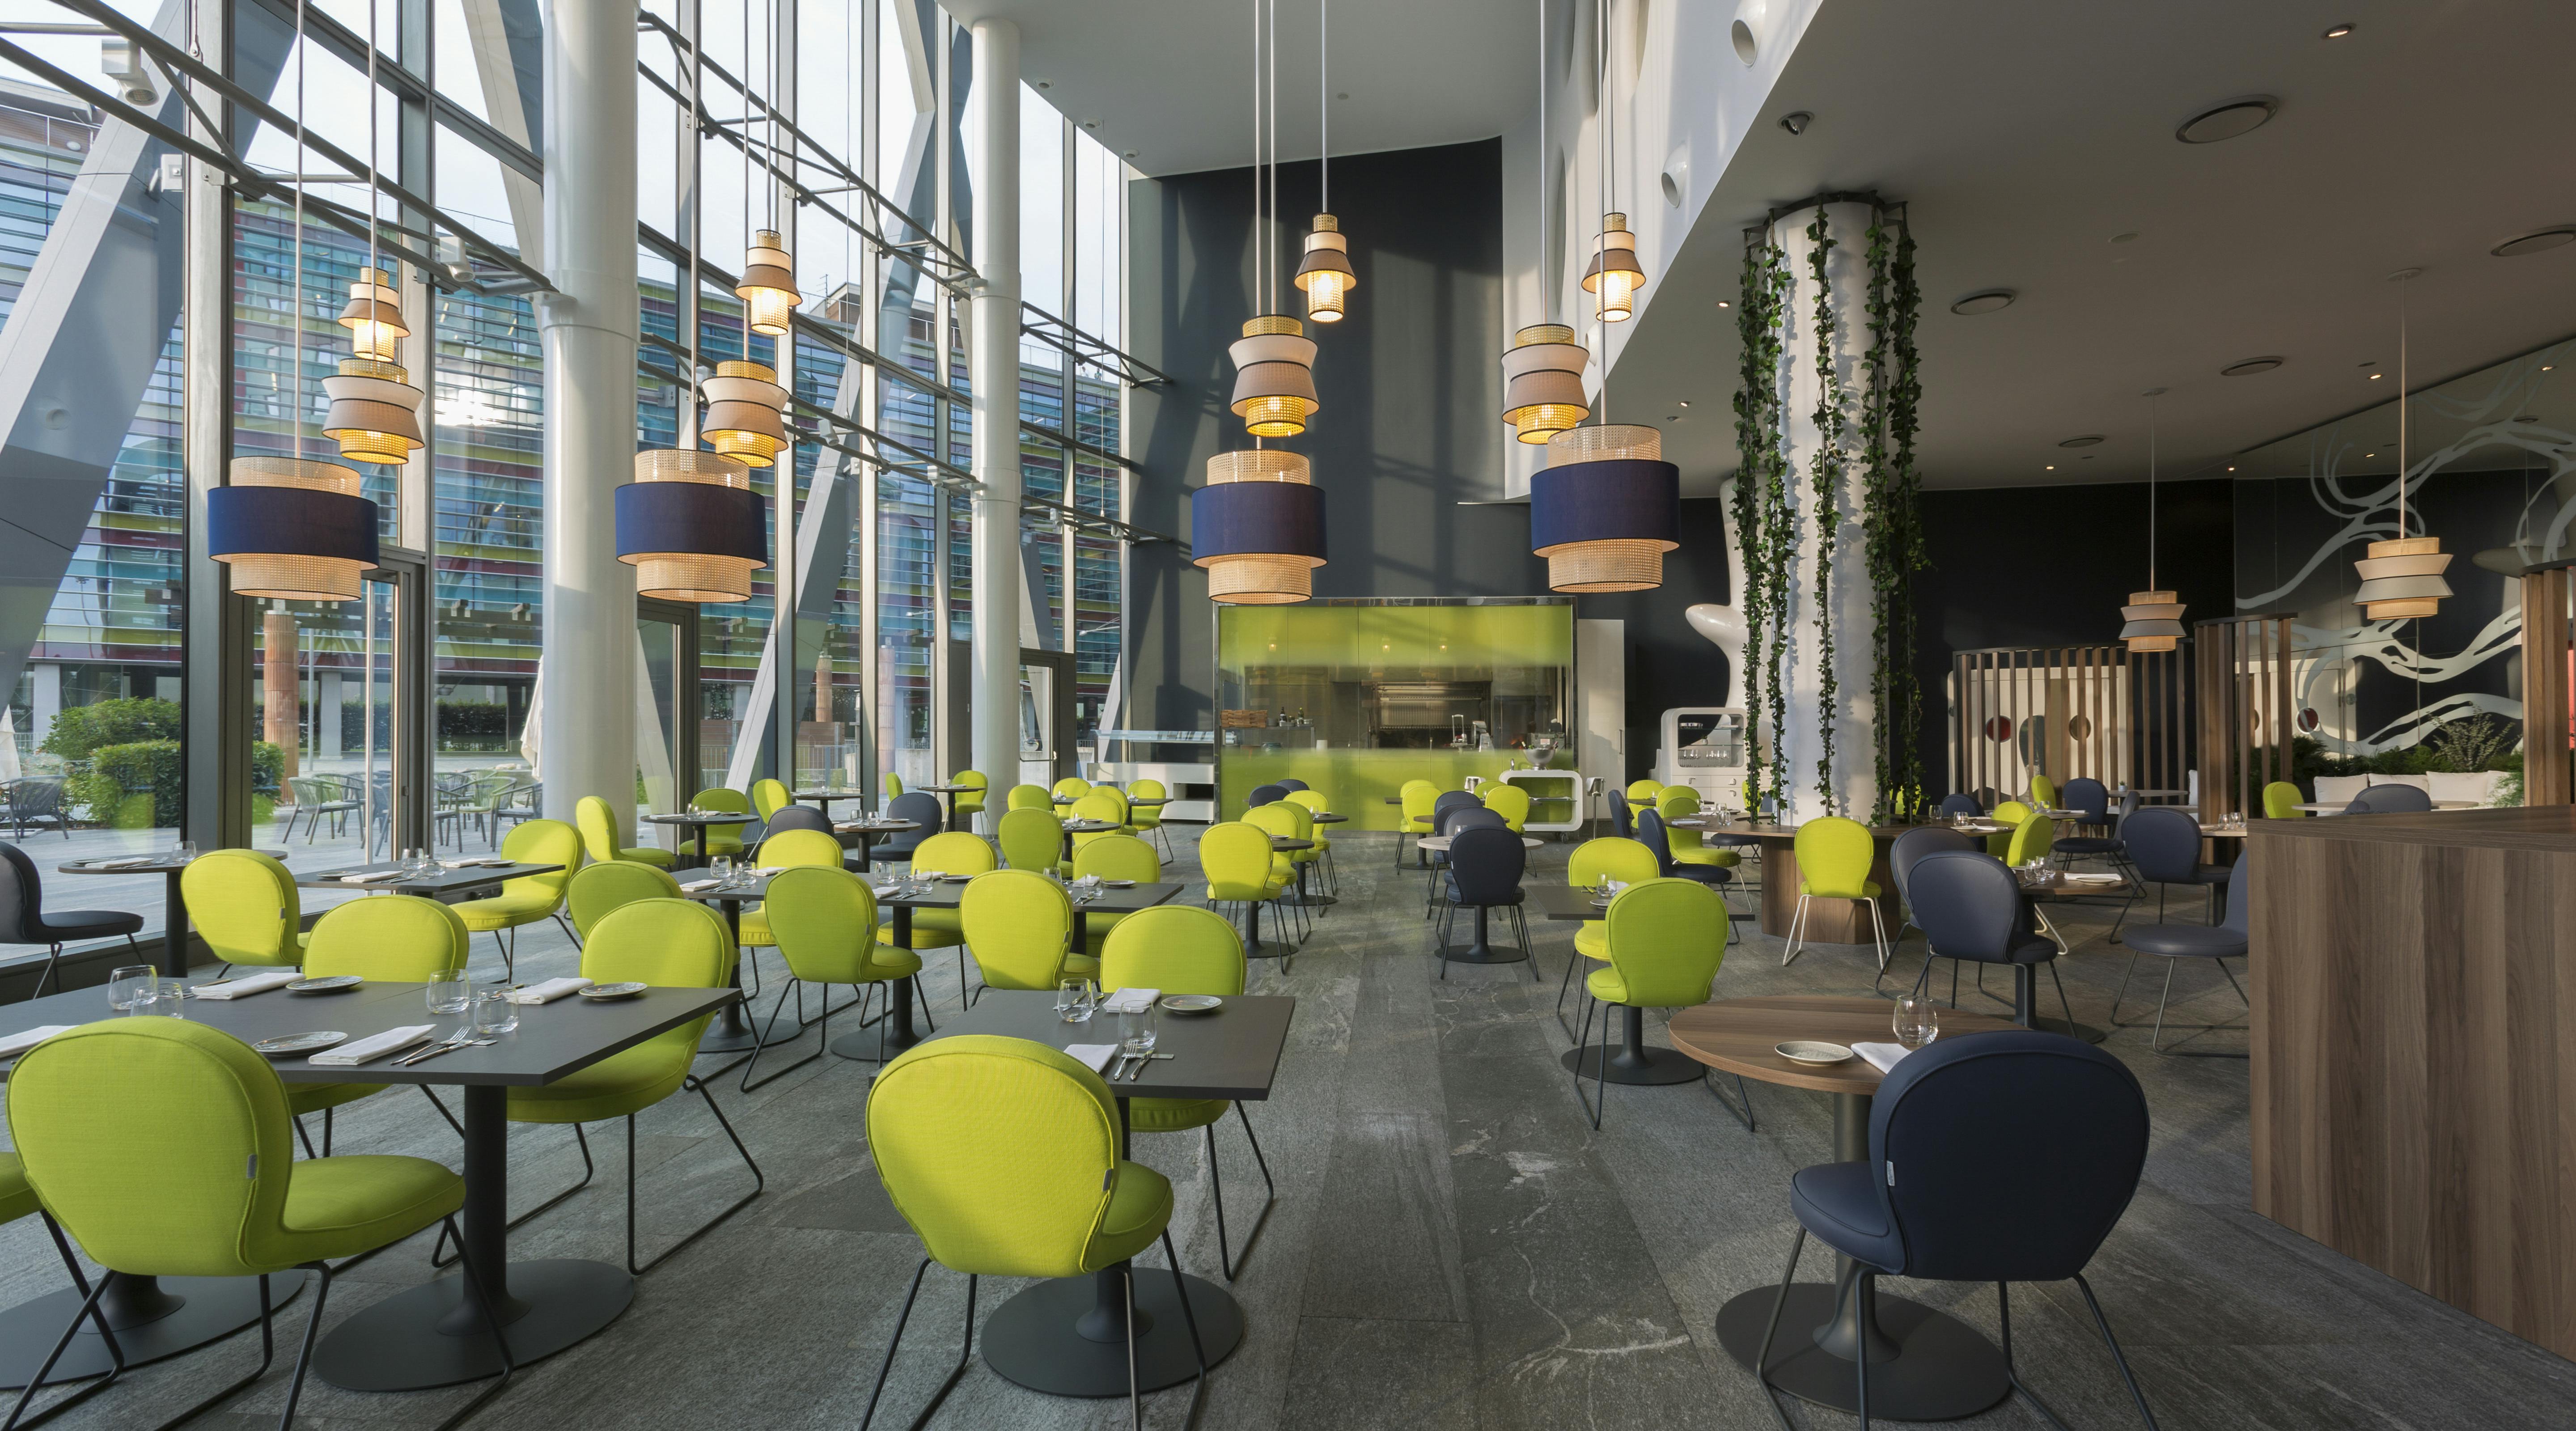 Restaurant area of ​​hotel with yellow chairs and wooden floor